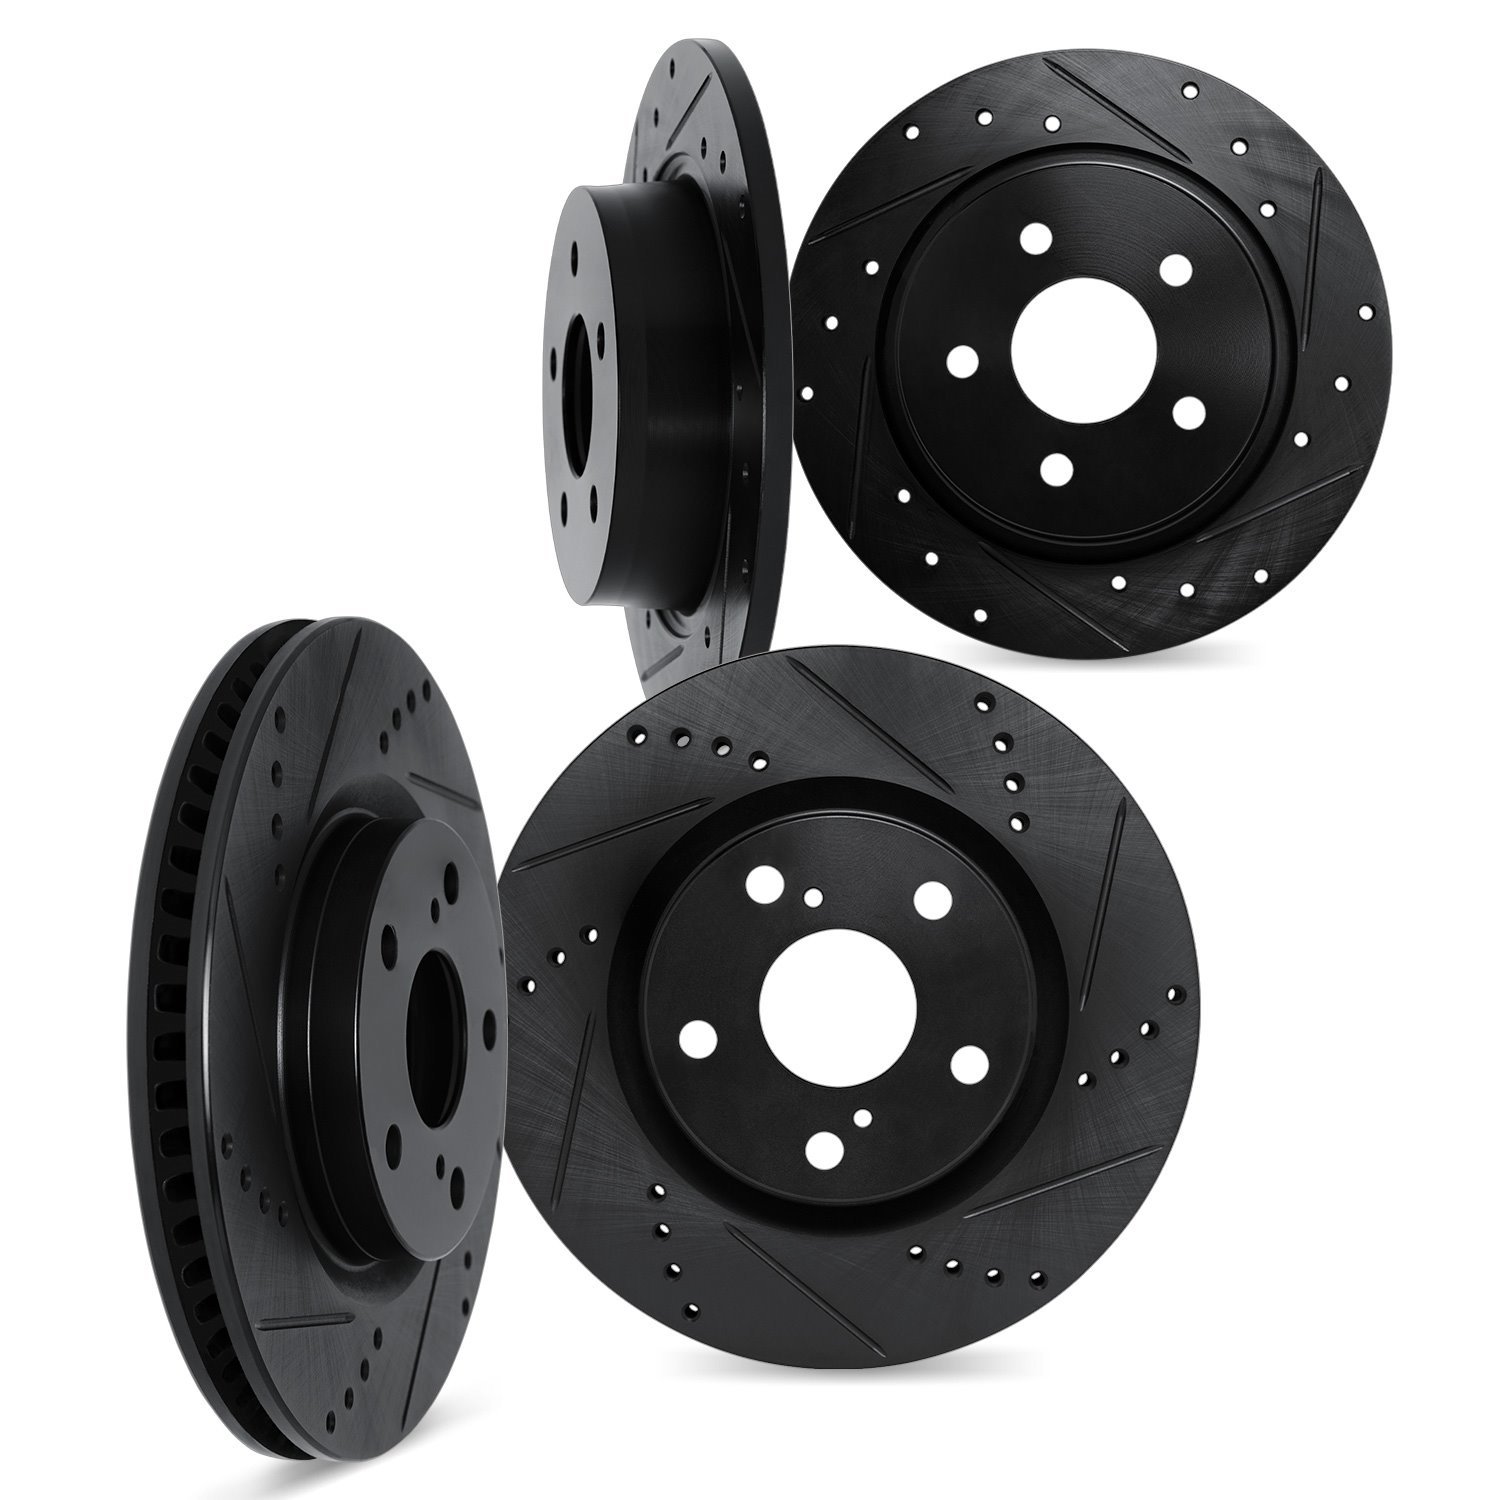 8004-16004 Drilled/Slotted Brake Rotors [Black], 1981-1989 Alfa Romeo, Position: Front and Rear